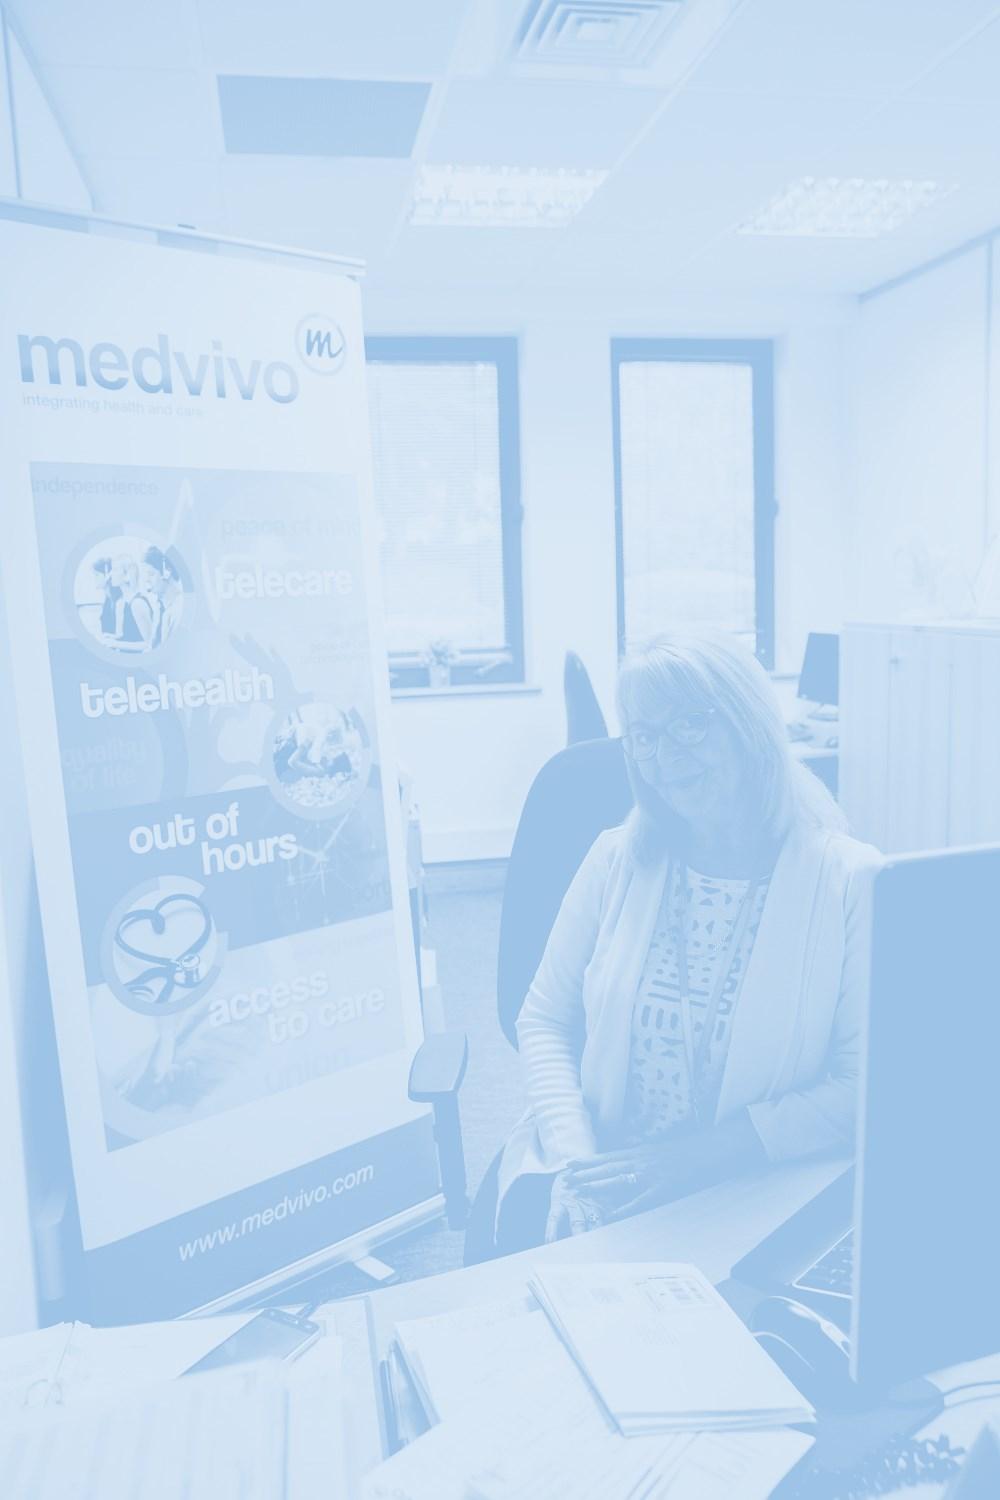 Reporting Criteria This report contains a statutory disclosure of the gender pay gap for Medvivo Group Limited.